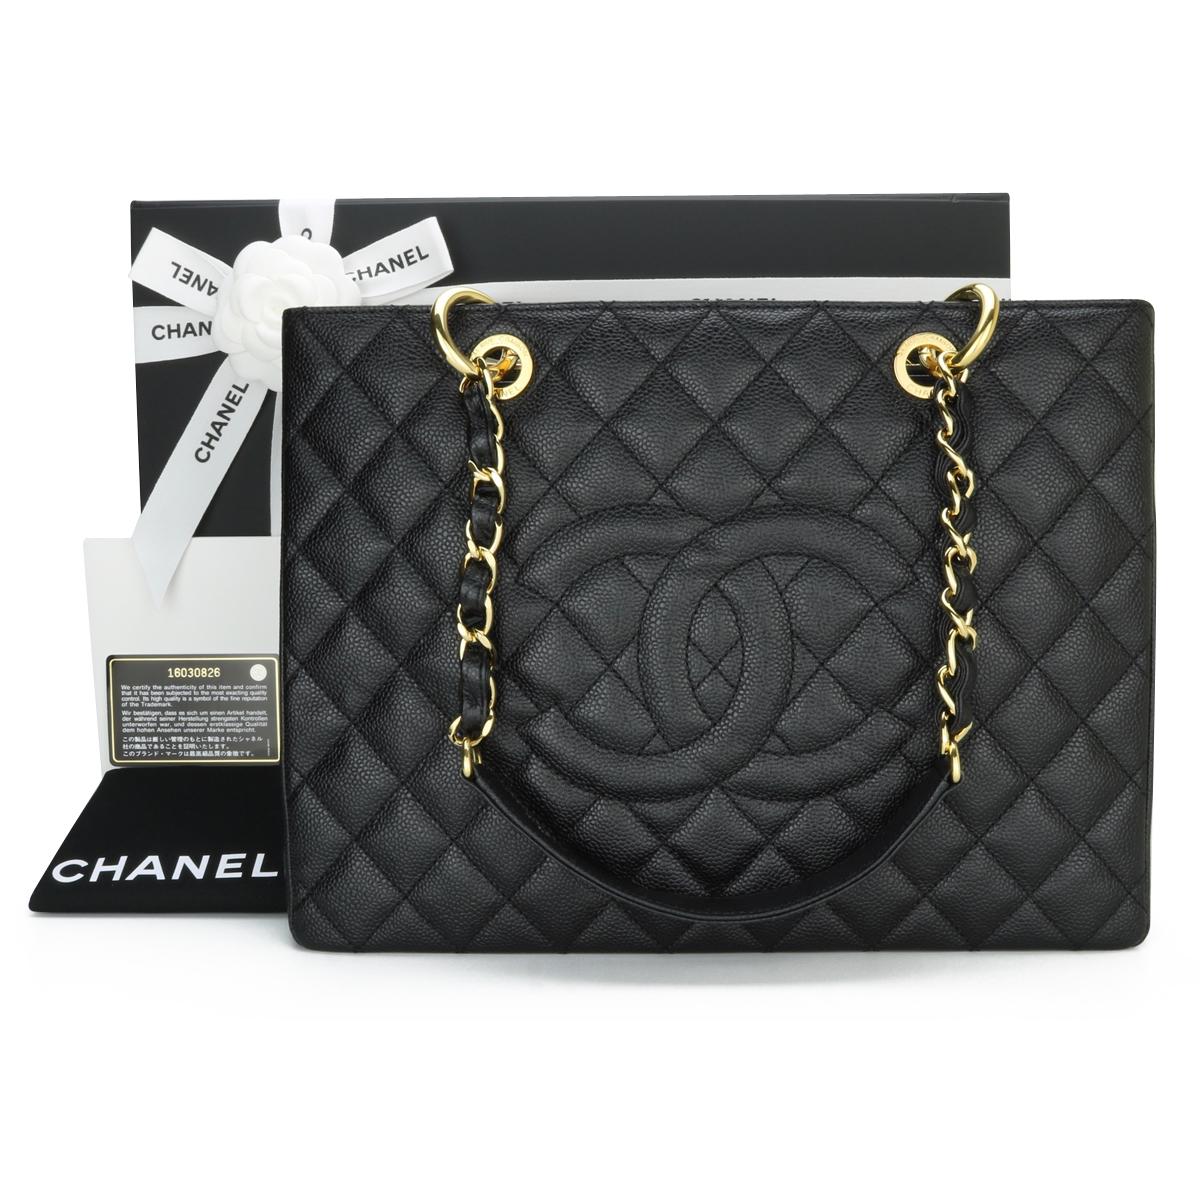 CHANEL Grand Shopping Tote (GST) Black Caviar with Gold Hardware 2012.

This bag is in pristine condition, the bag still holds its original shape, and the hardware is still very shiny.

As Chanel has discontinued the Grand Shopping Tote (GST), it is